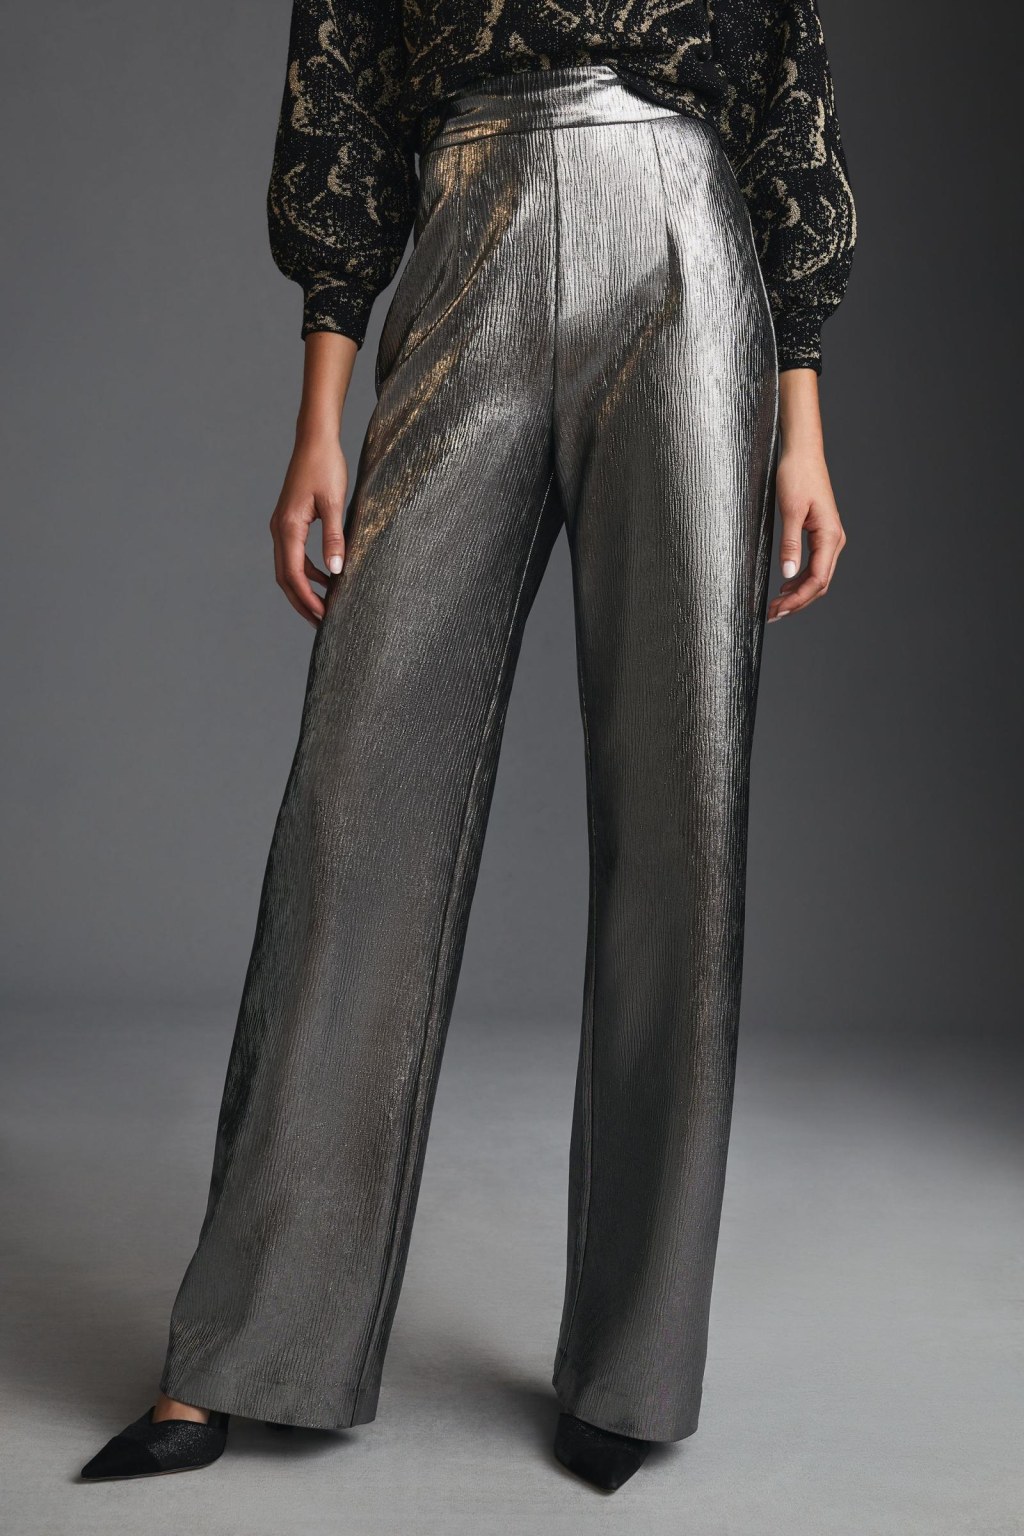 Picture of: Hutch Silver Metallic Pants  Anthropologie Korea – Women’s Clothing,  Accessories & Home